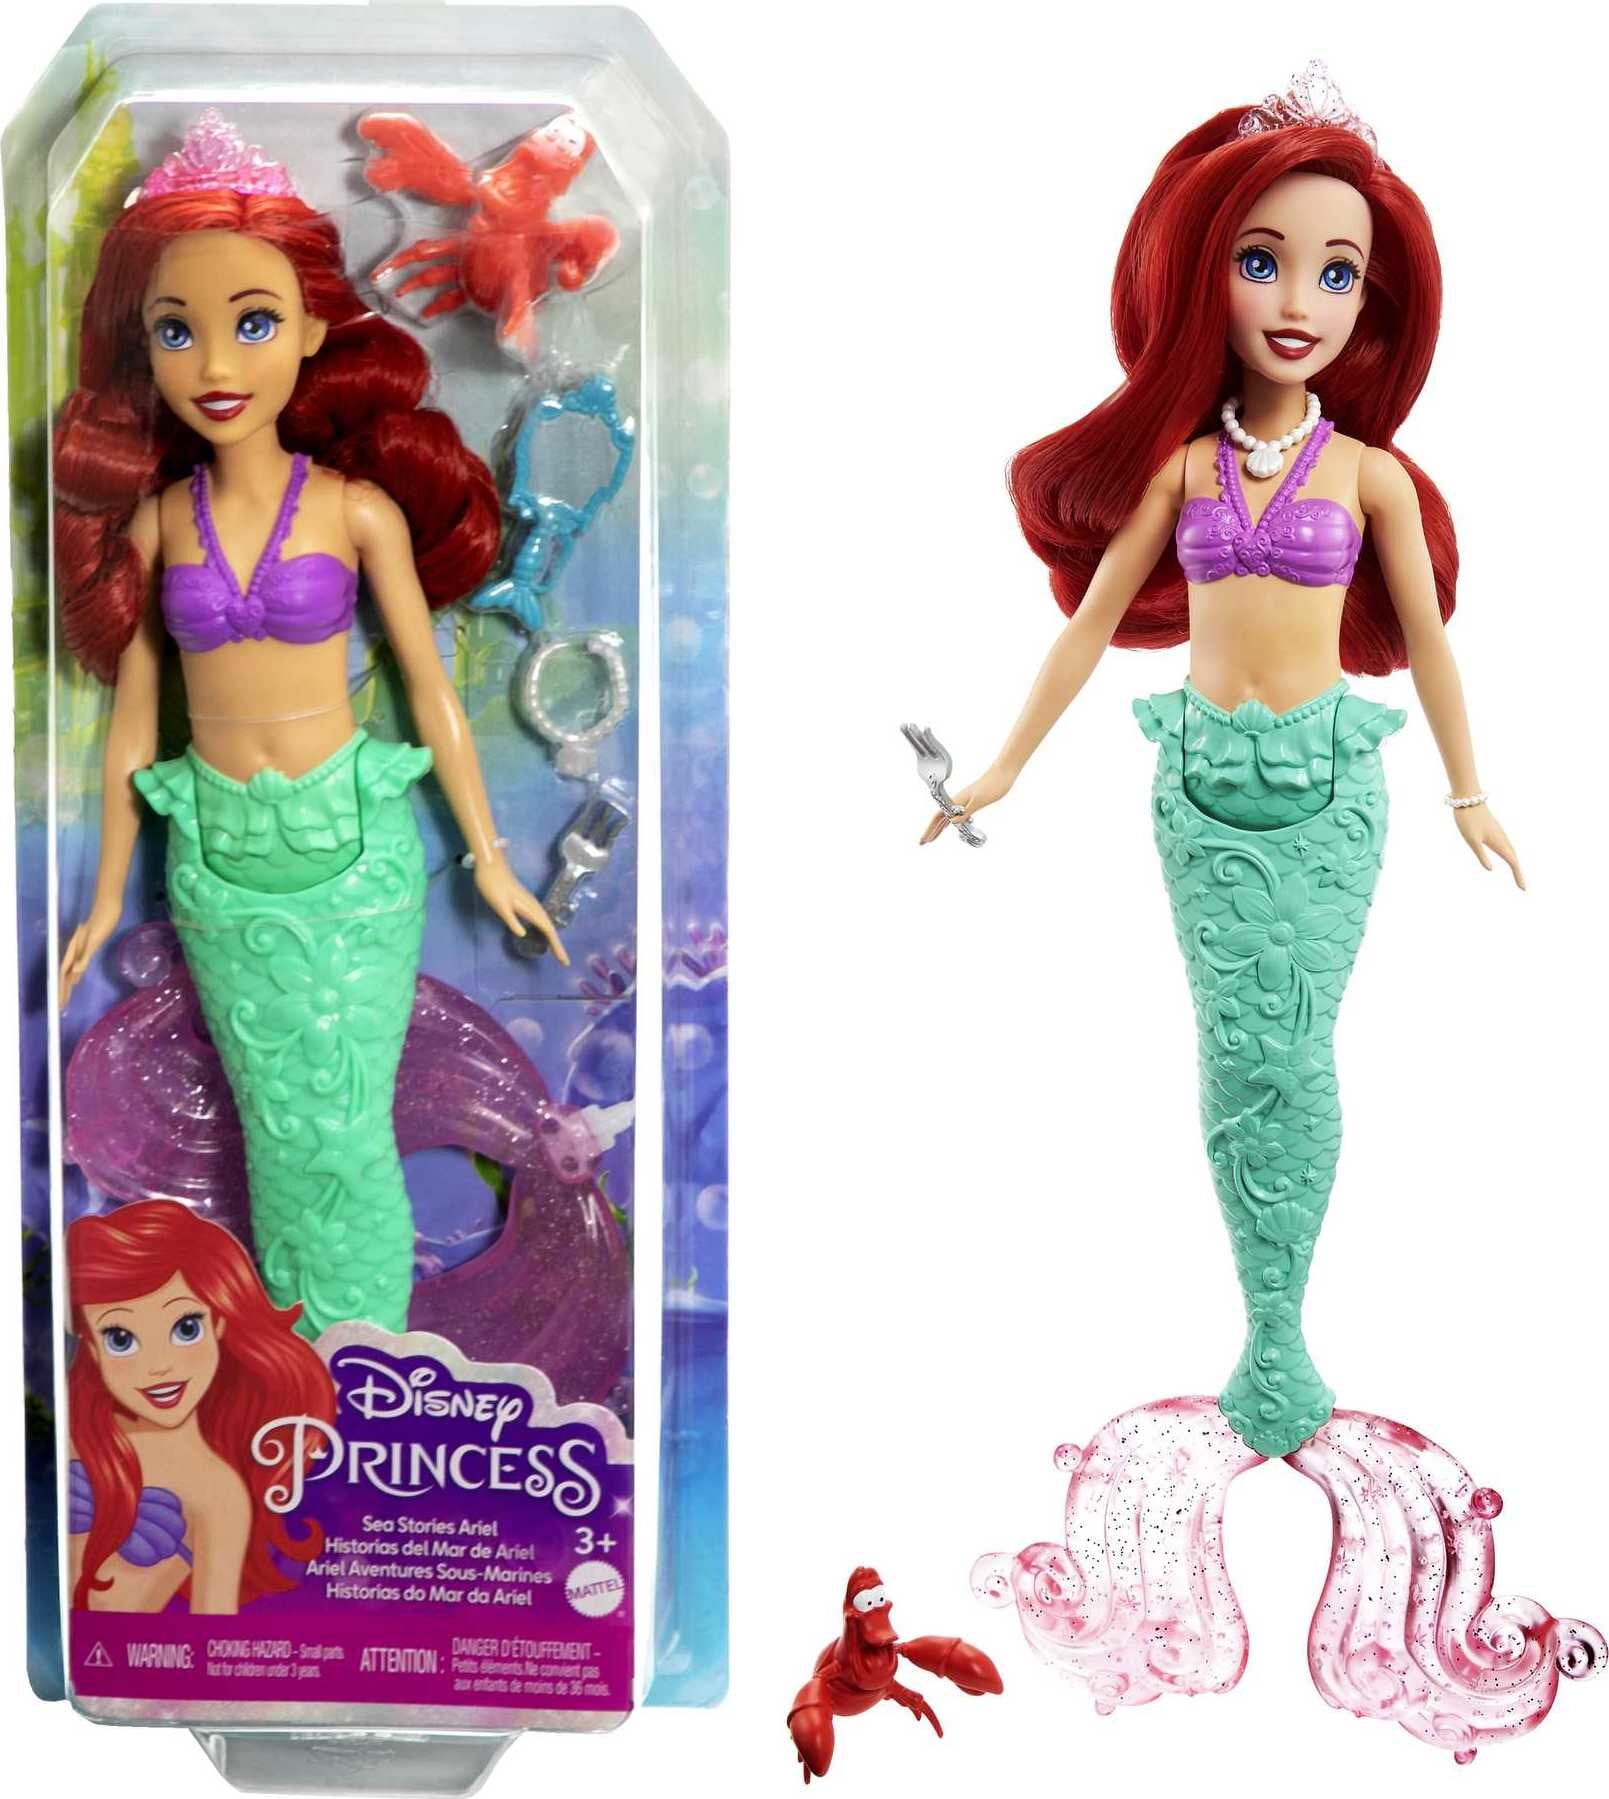 Disney Princess Ariel Mermaid Fashion Doll, Character Friend and 3 Accessories, New for 2023